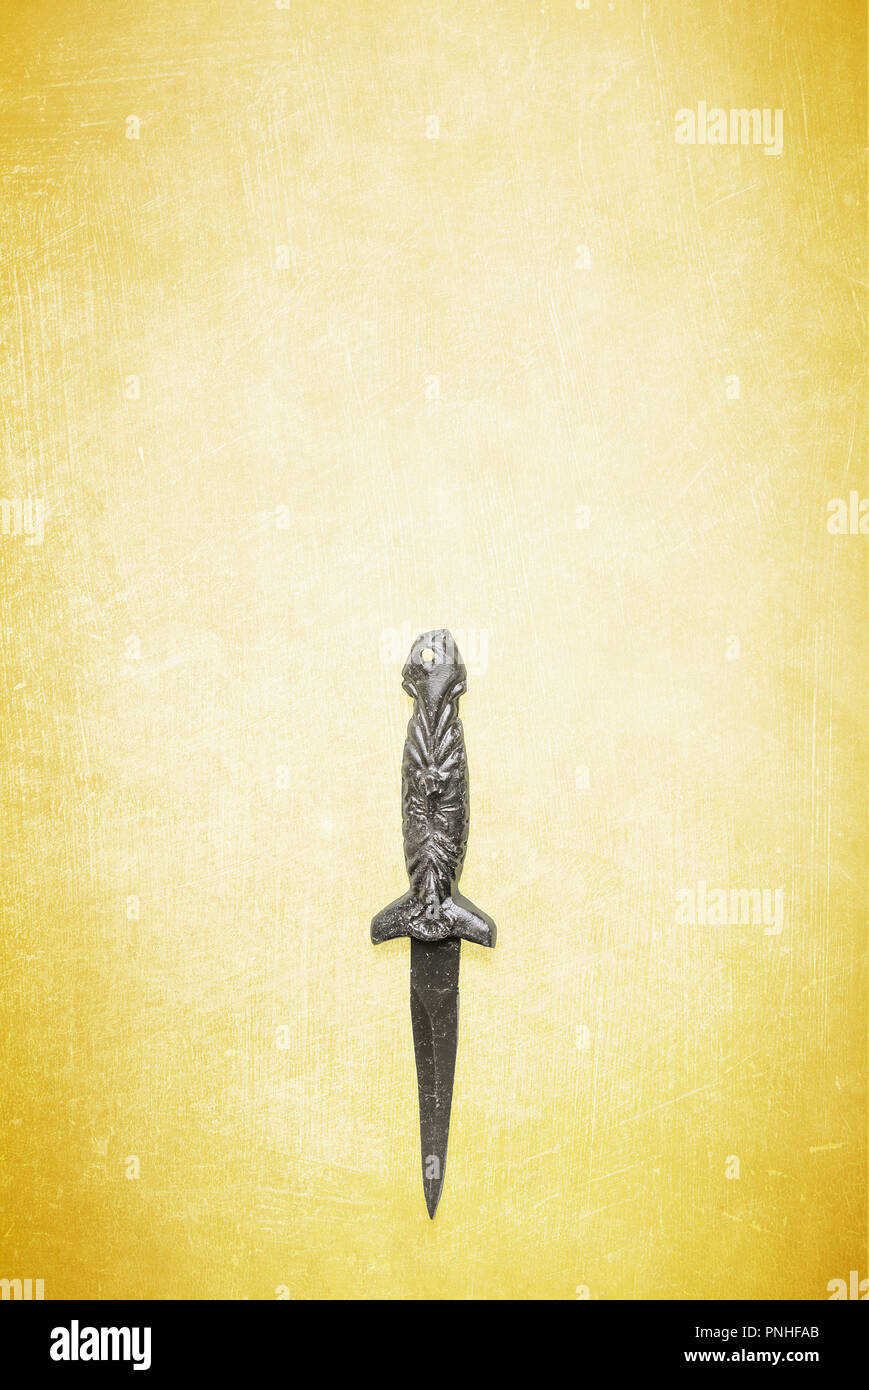 Black wicca wiccan dagger on a textured yellow background.  Ceremonial blade for use in religious and spiritual rituals. Stock Photo